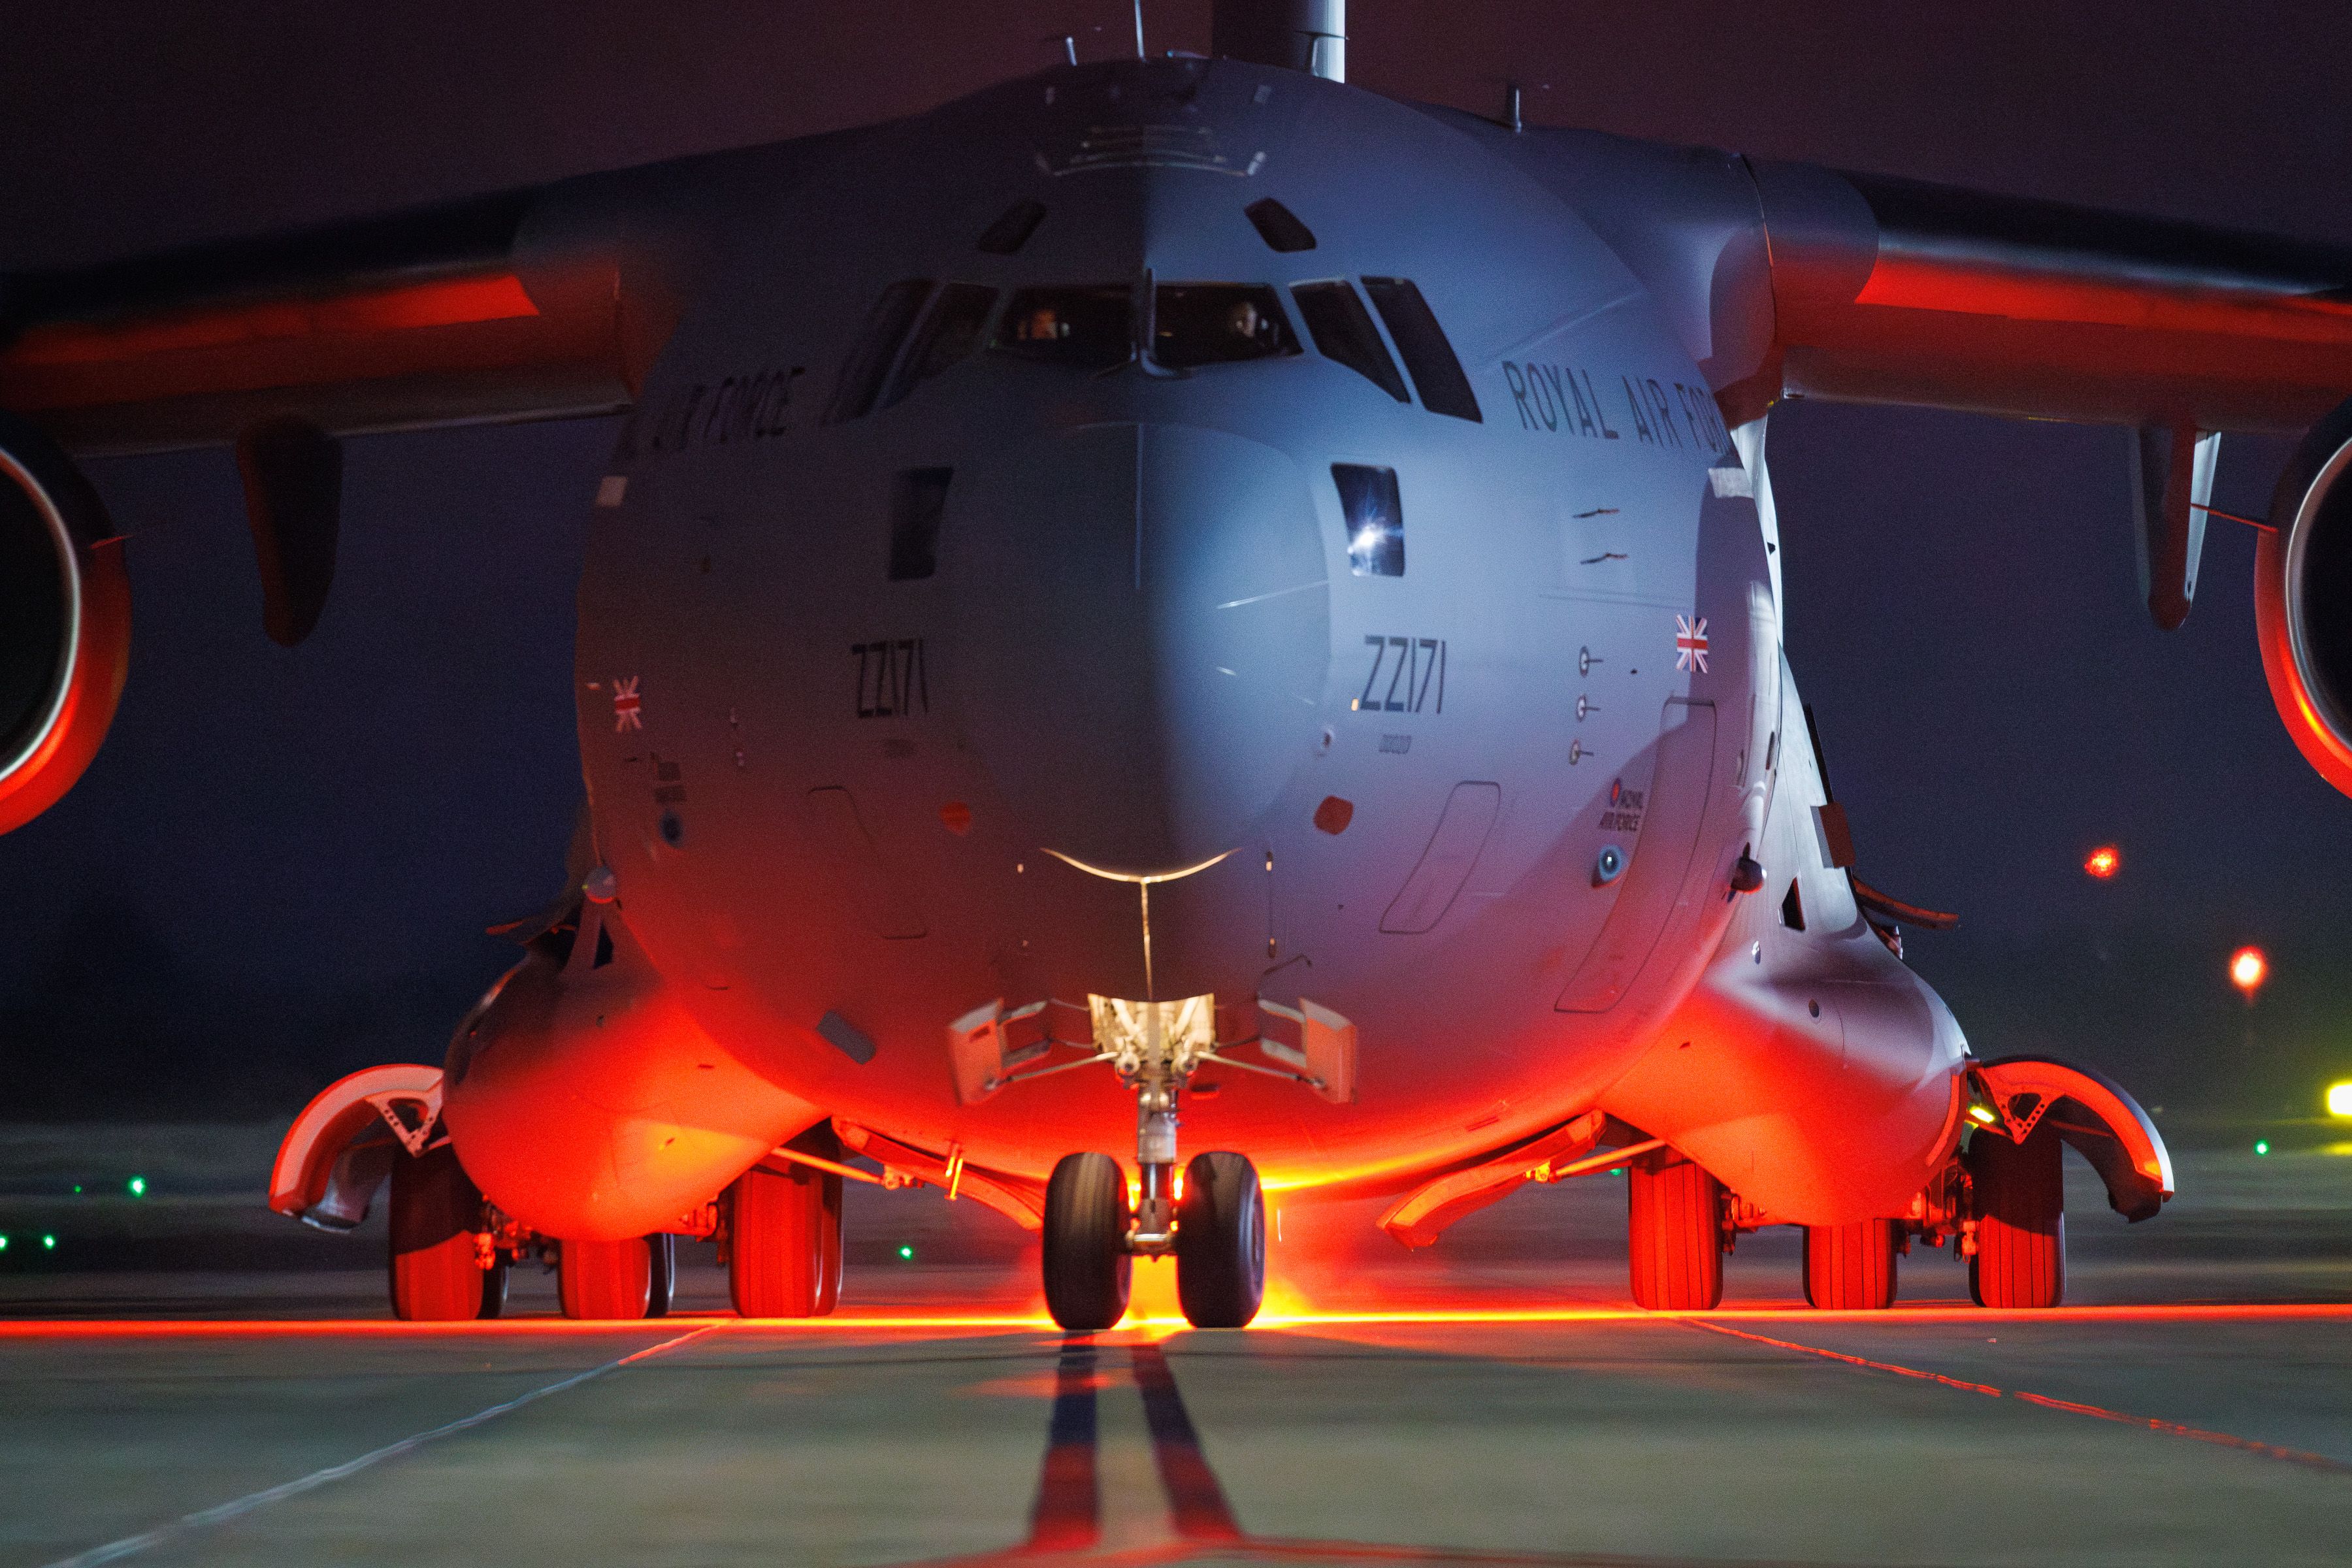 Close up of C-17 aircraft on runway at night, lit up from beneath by red light